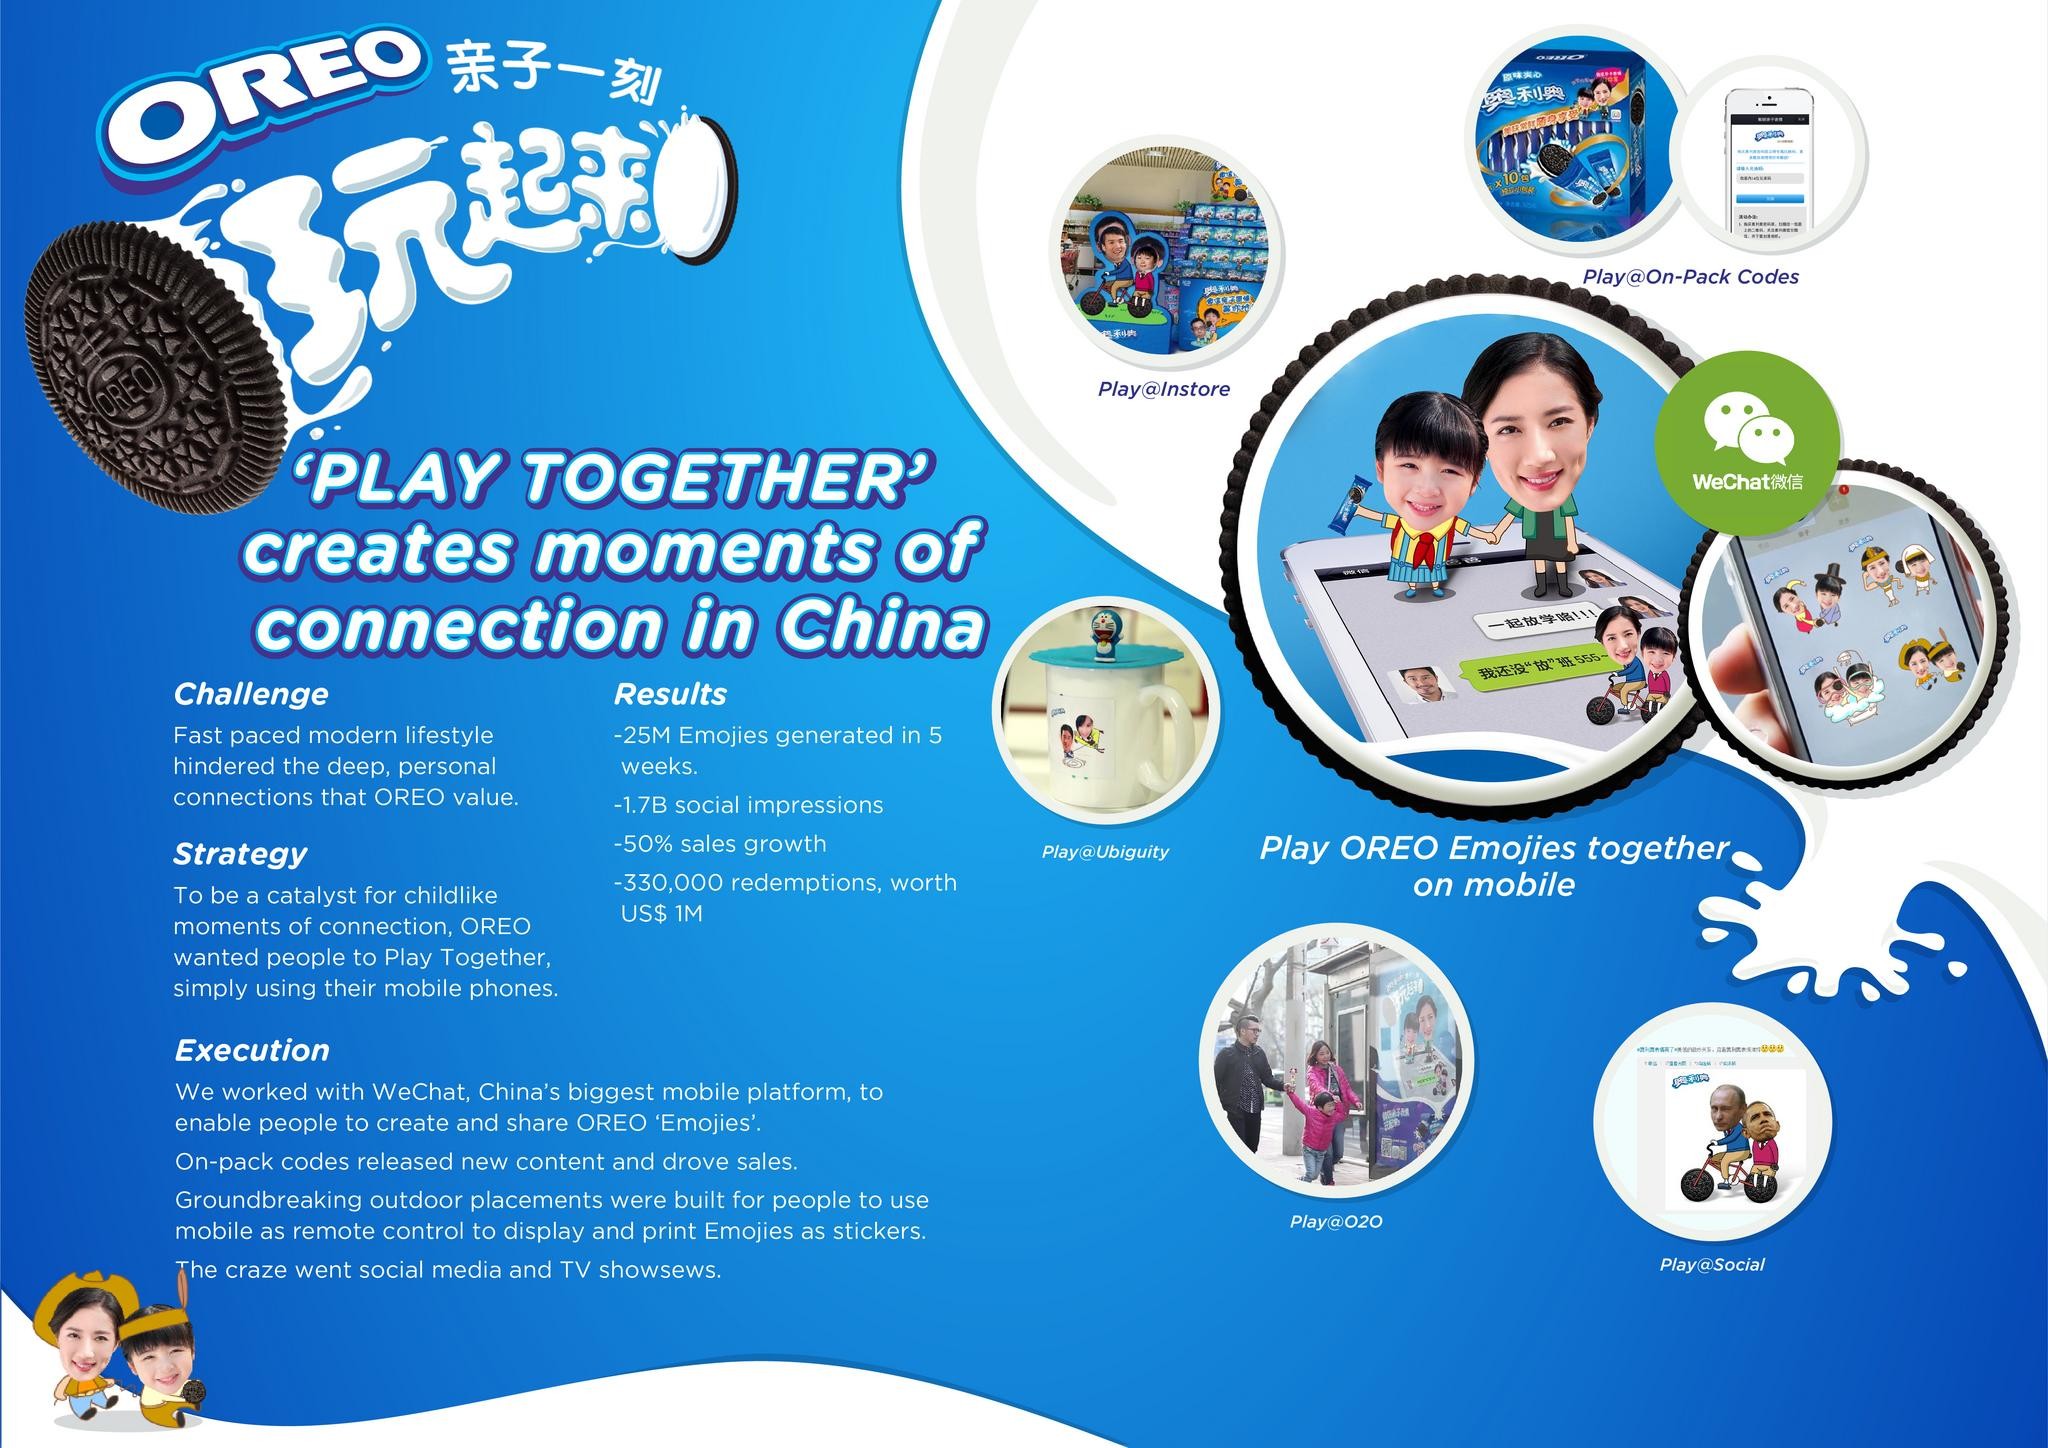 OREO: PLAY TOGETHER